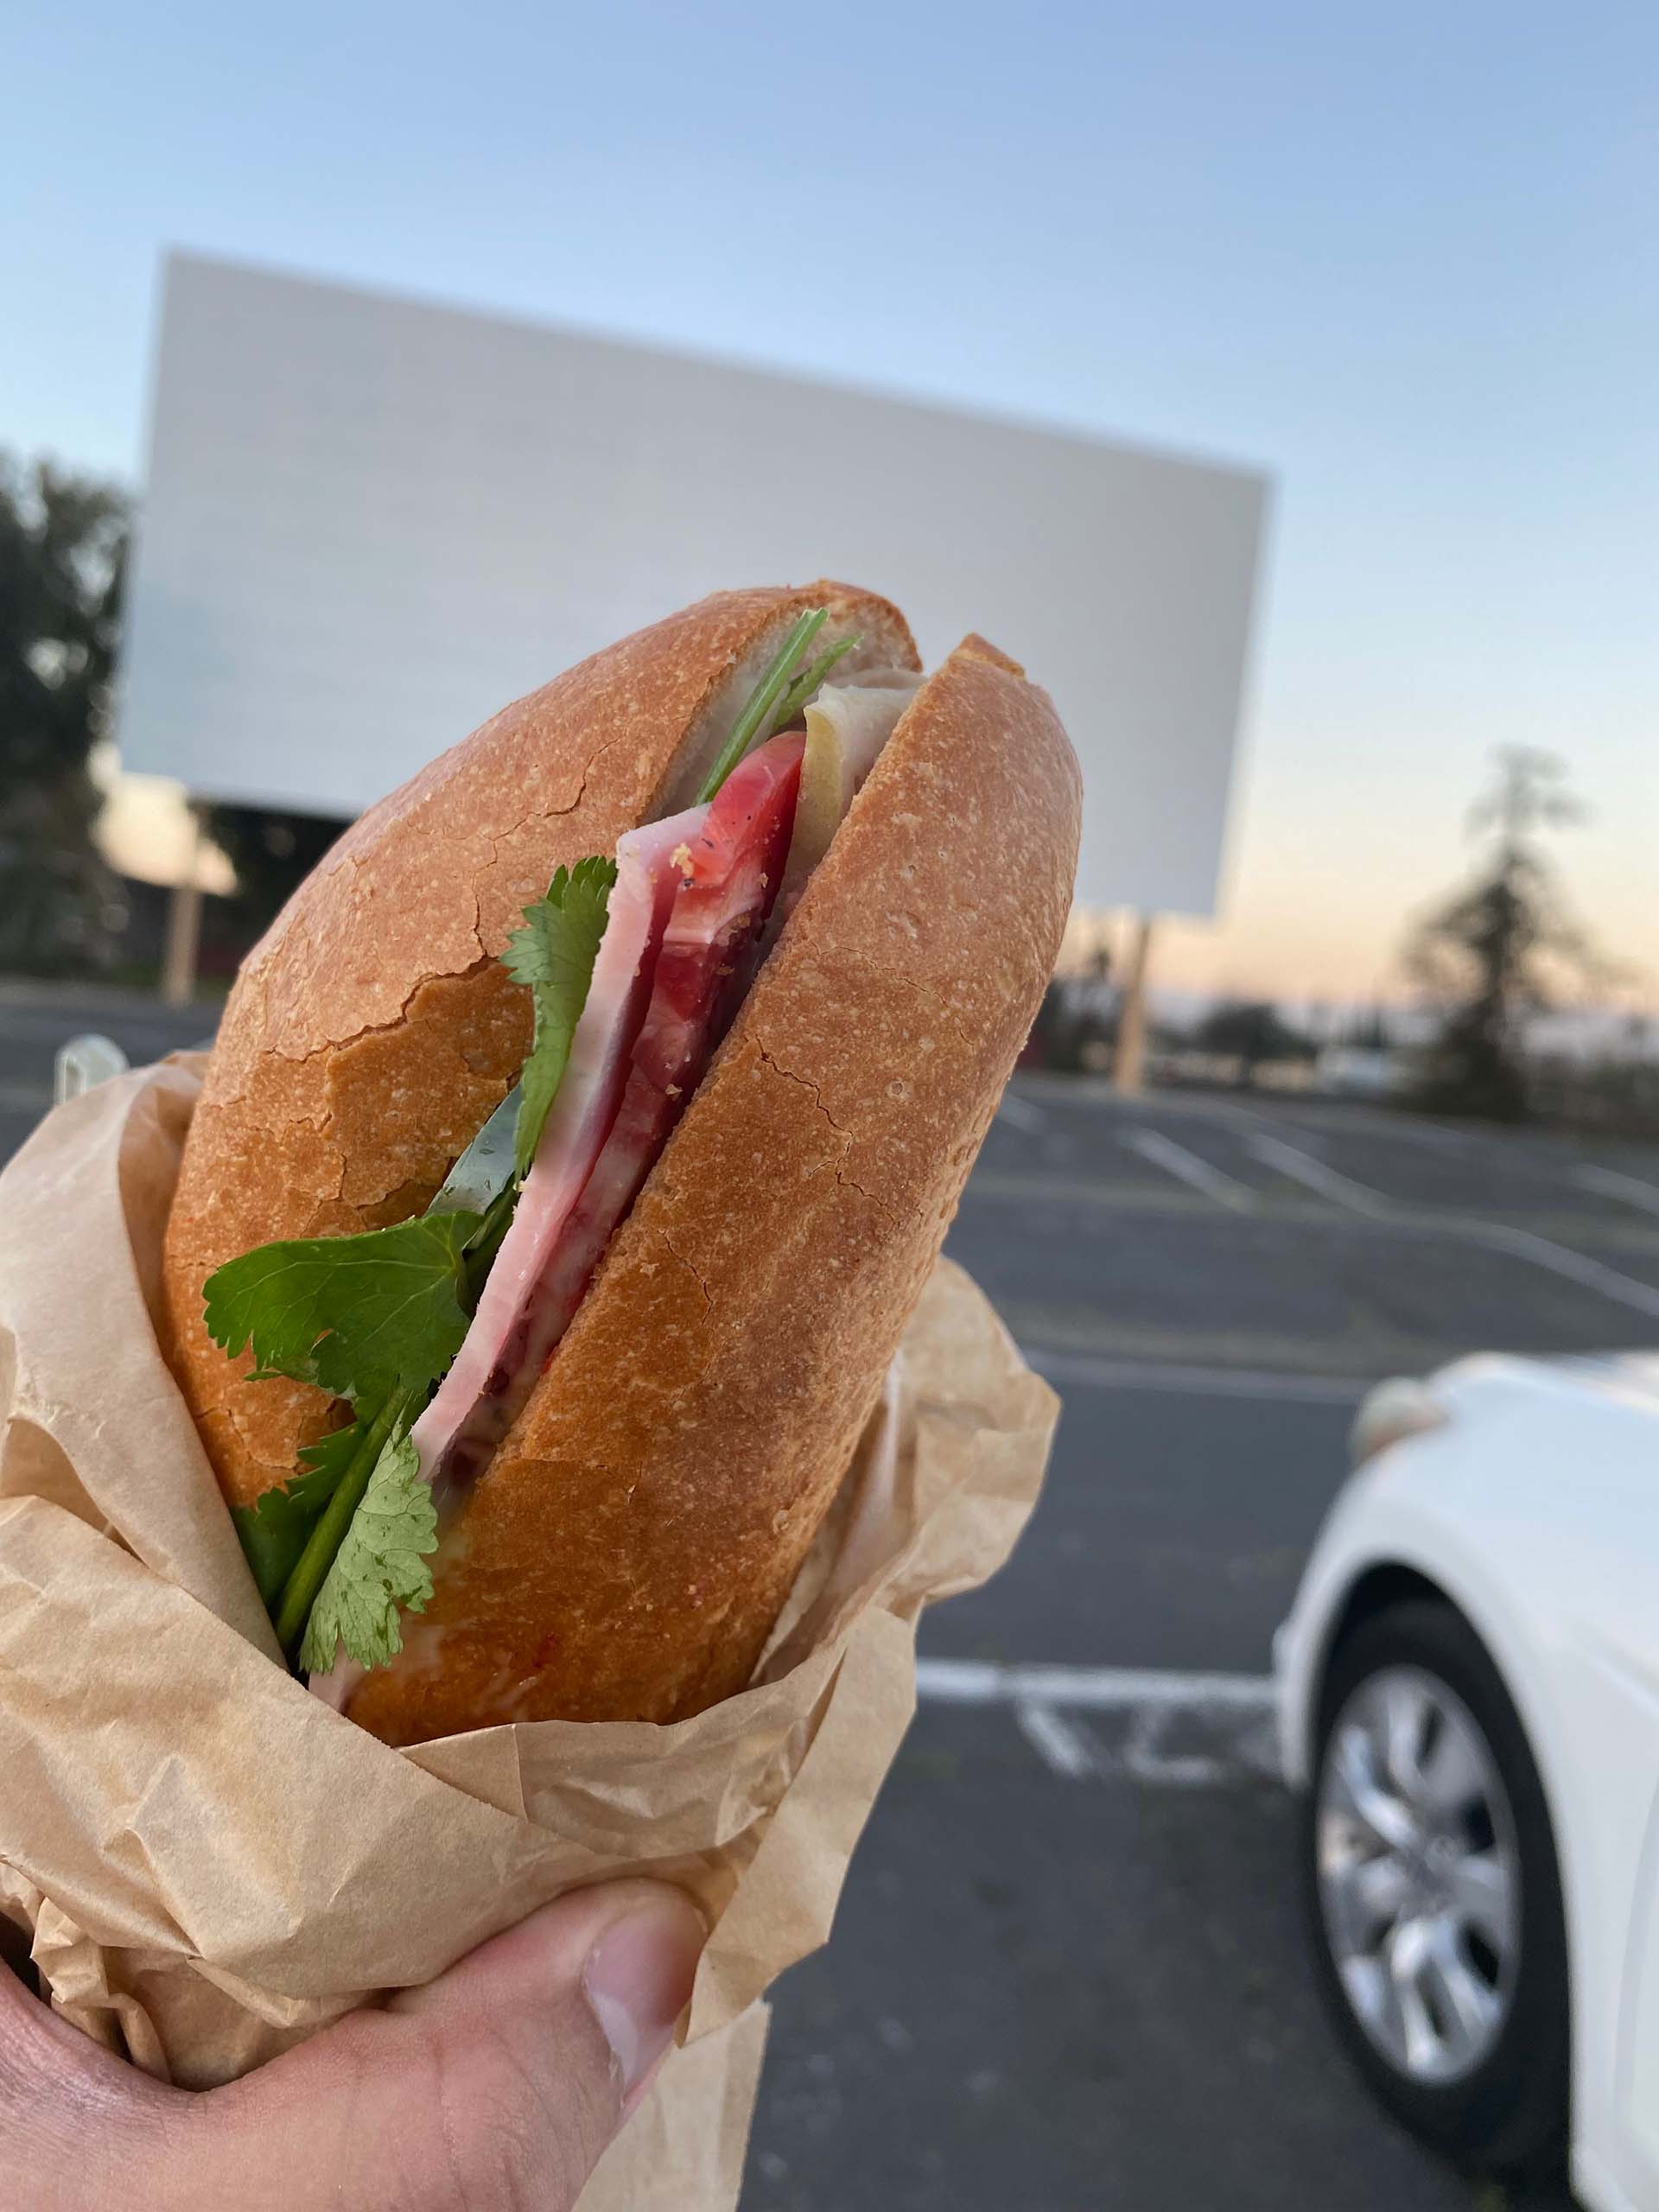 A banh mi sandwich held up with a drive-in theater movie screen in the background.